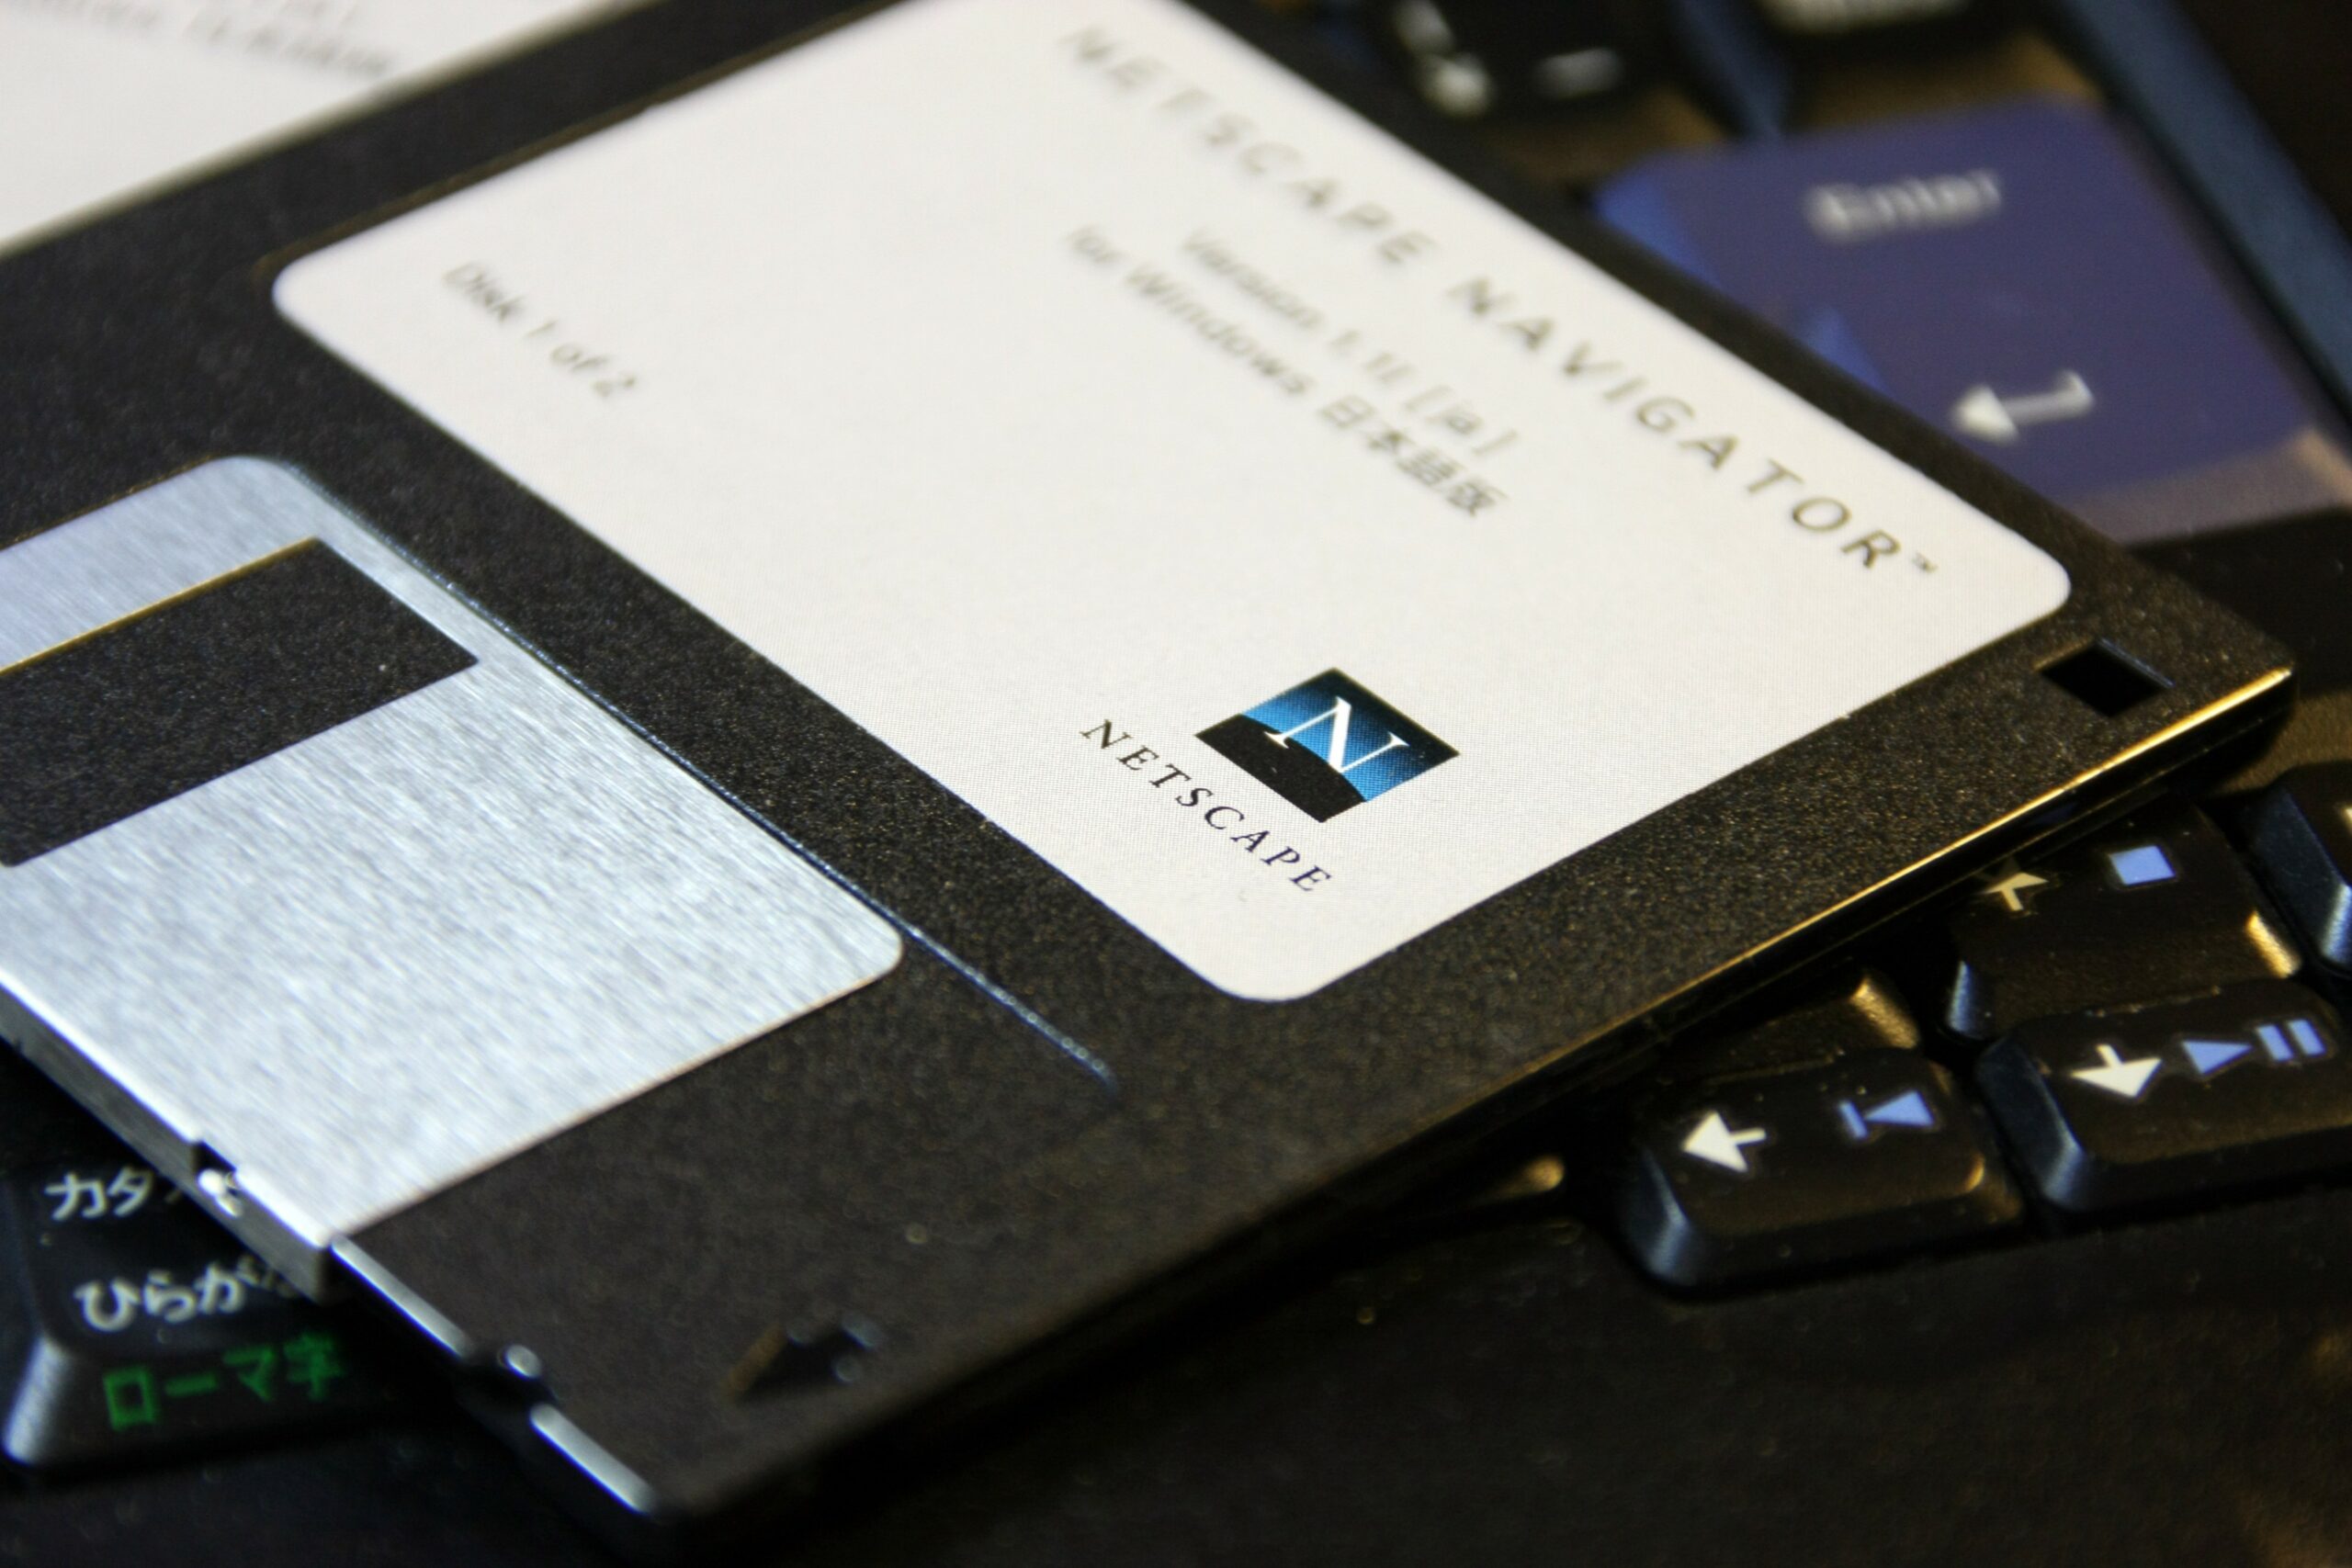 A floppy disk used for install king Netscape Navigator.